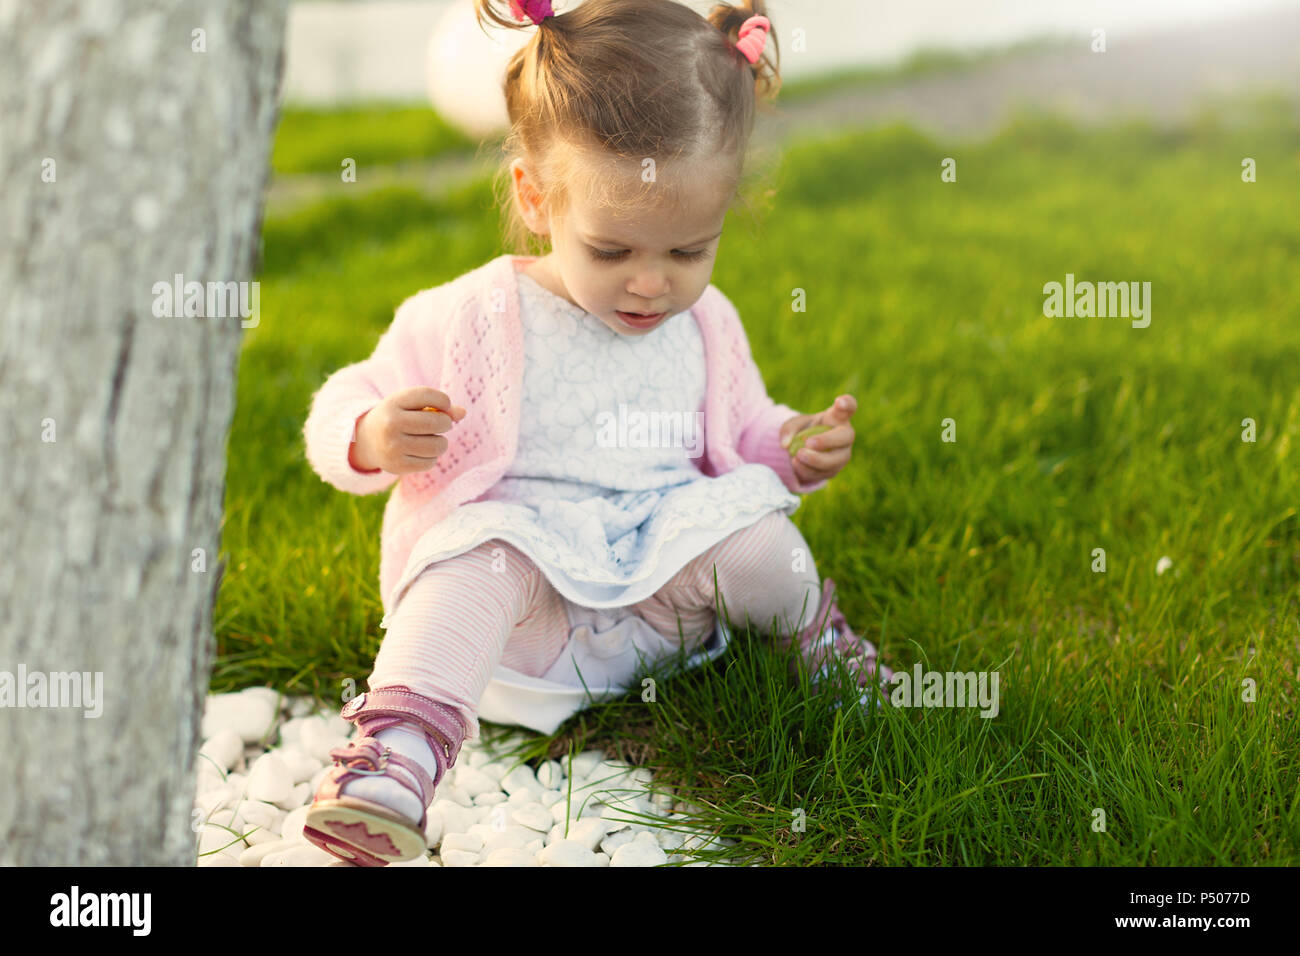 little curly girl with two tails sitting on the lawn near a tree. Summer season photo. Playful mood. Sunny Stock Photo